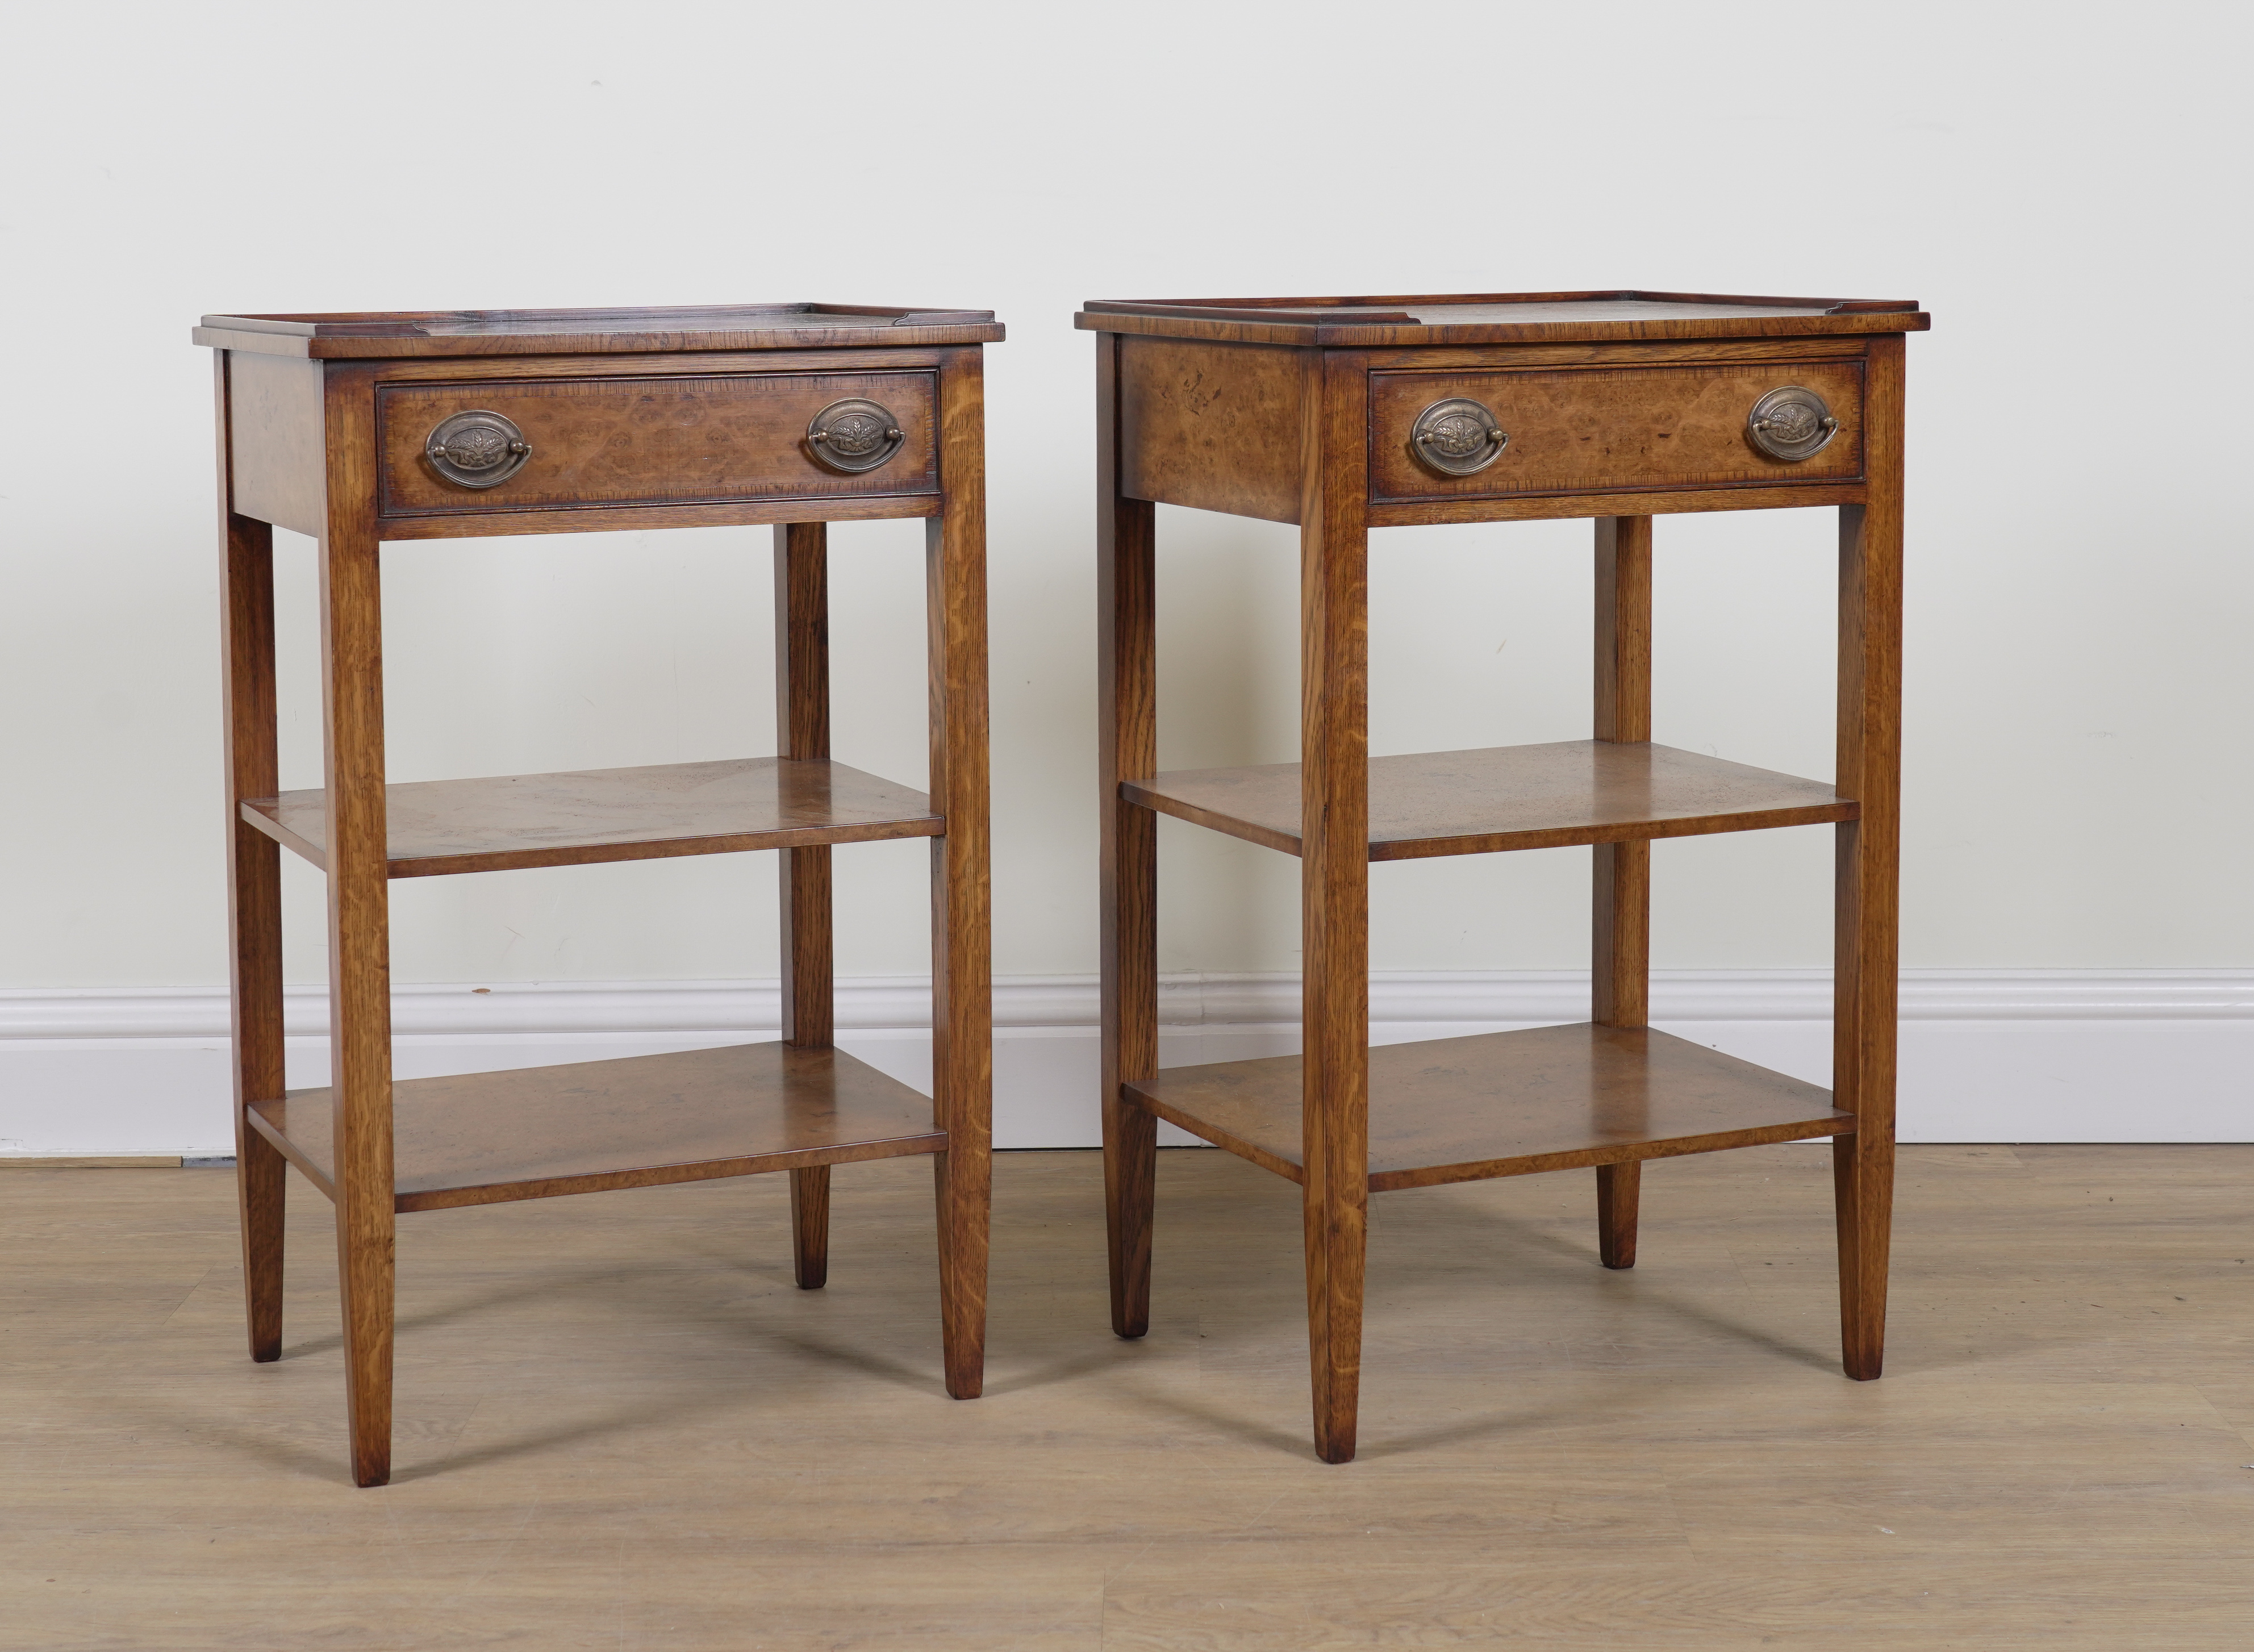 A PAIR OF FIGURED WALNUT SINGLE DRAWER THREE TIER RECTANGULAR SIDE TABLES (2)